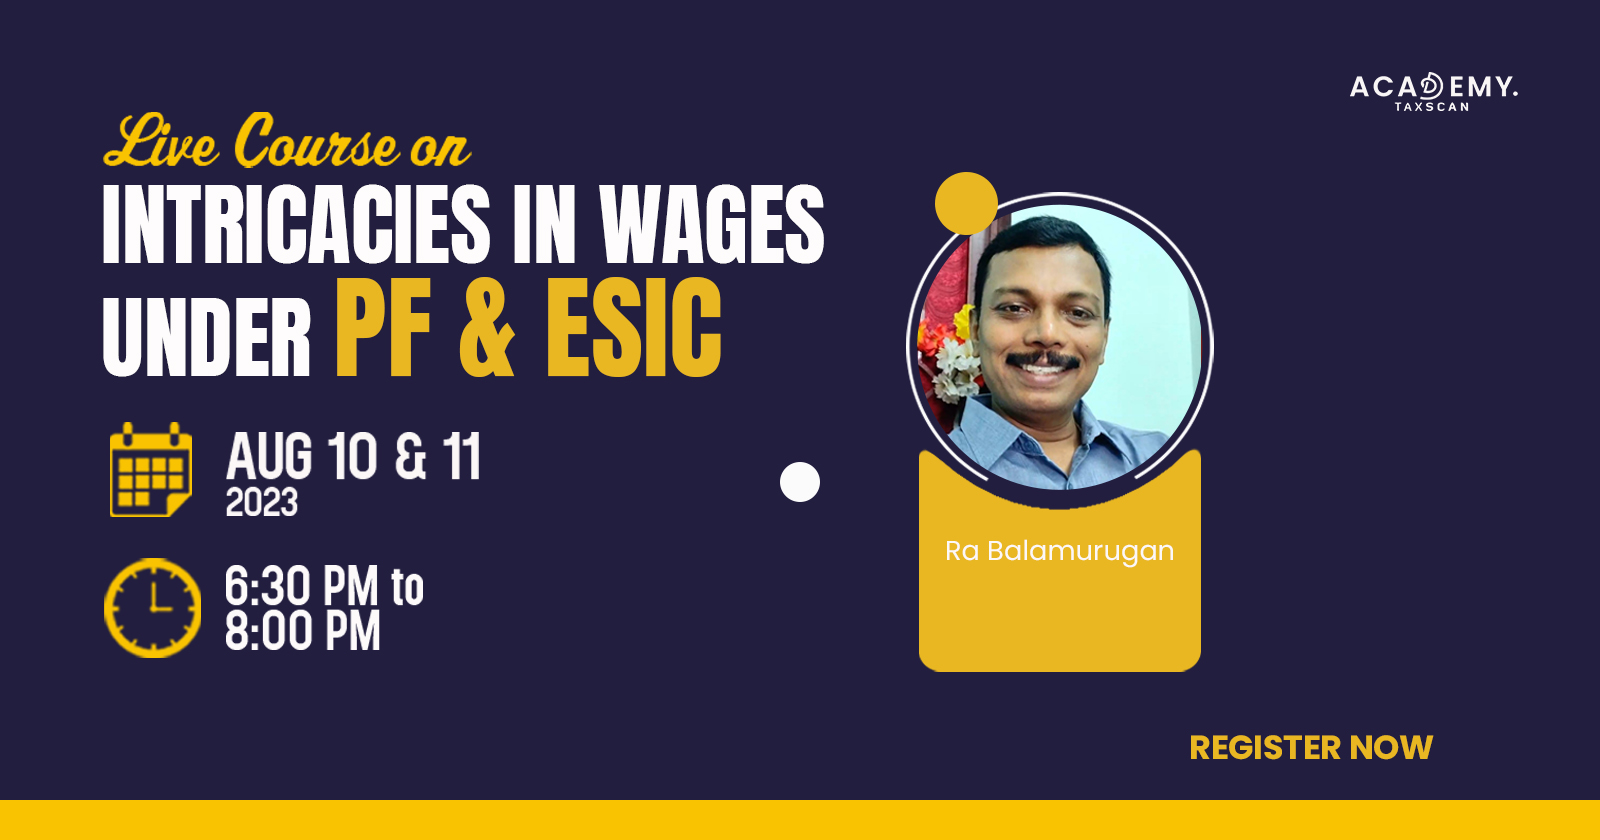 Live Course - Intricacies in Wages under PF and ESIC - Wages - PF - ESIC - PF and ESIC - Certificate Course - online certificate course - Course 2023 - Course - certificate course 2023  - taxscan academy